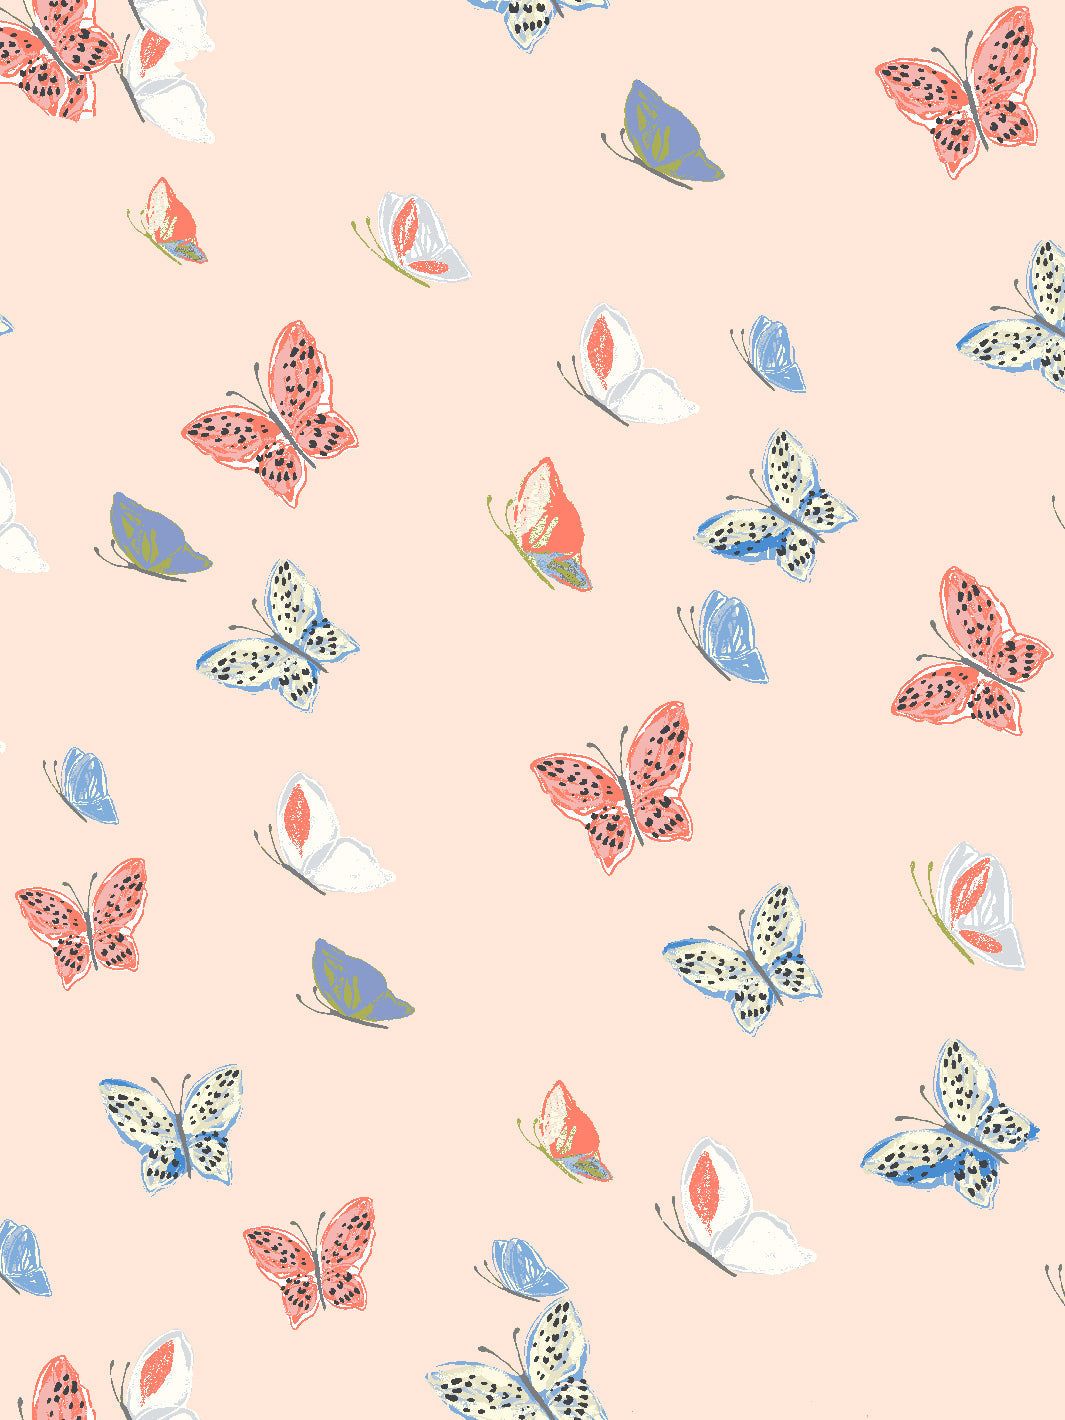 A pattern of hand painted butterflies in a repeat pattern - Peach